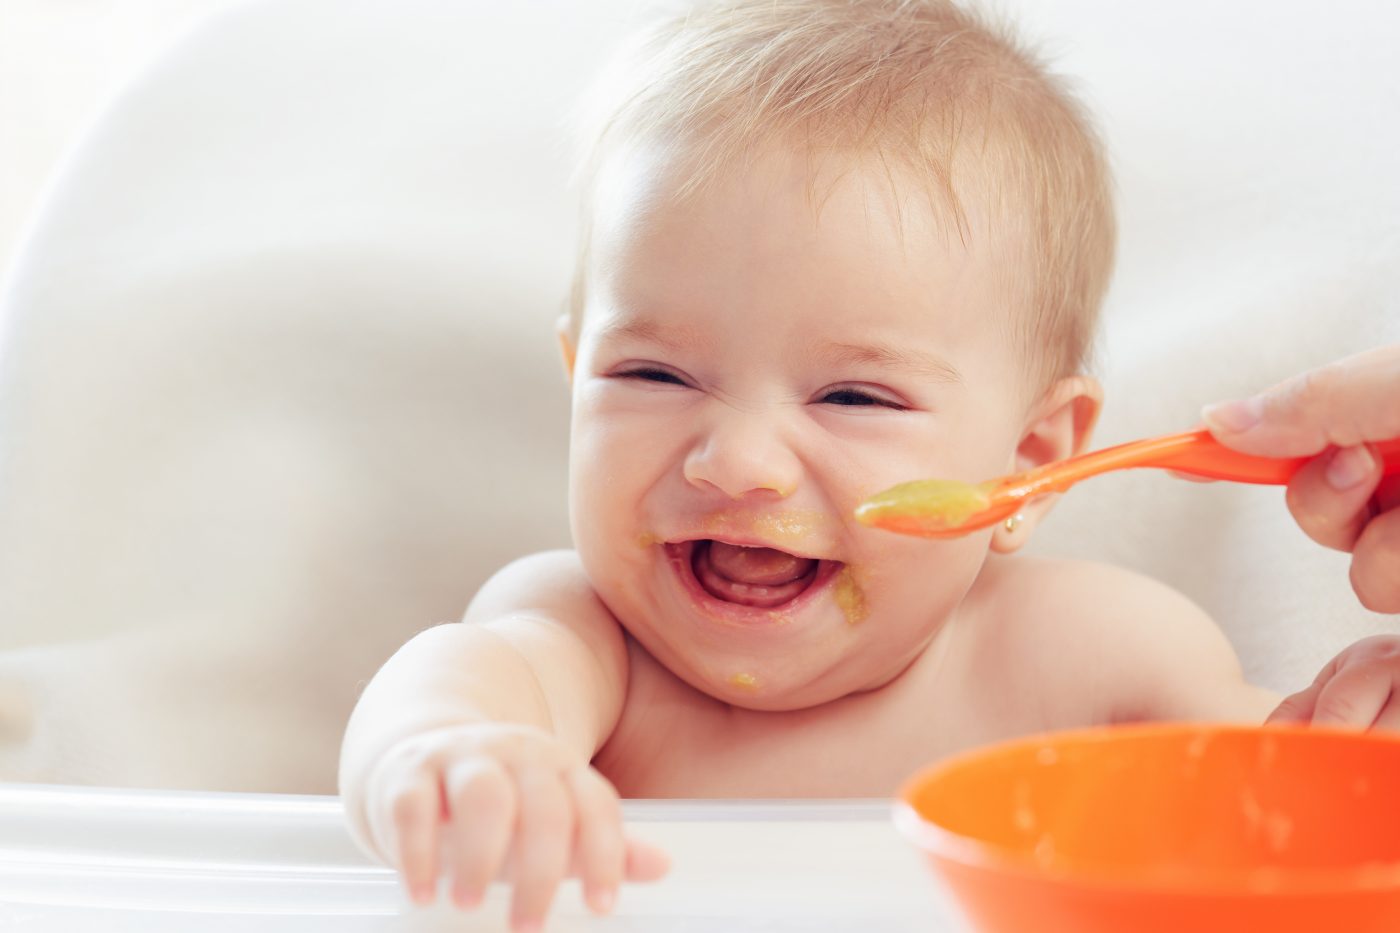 Good Nutrition Early in Life supports Lifelong Health